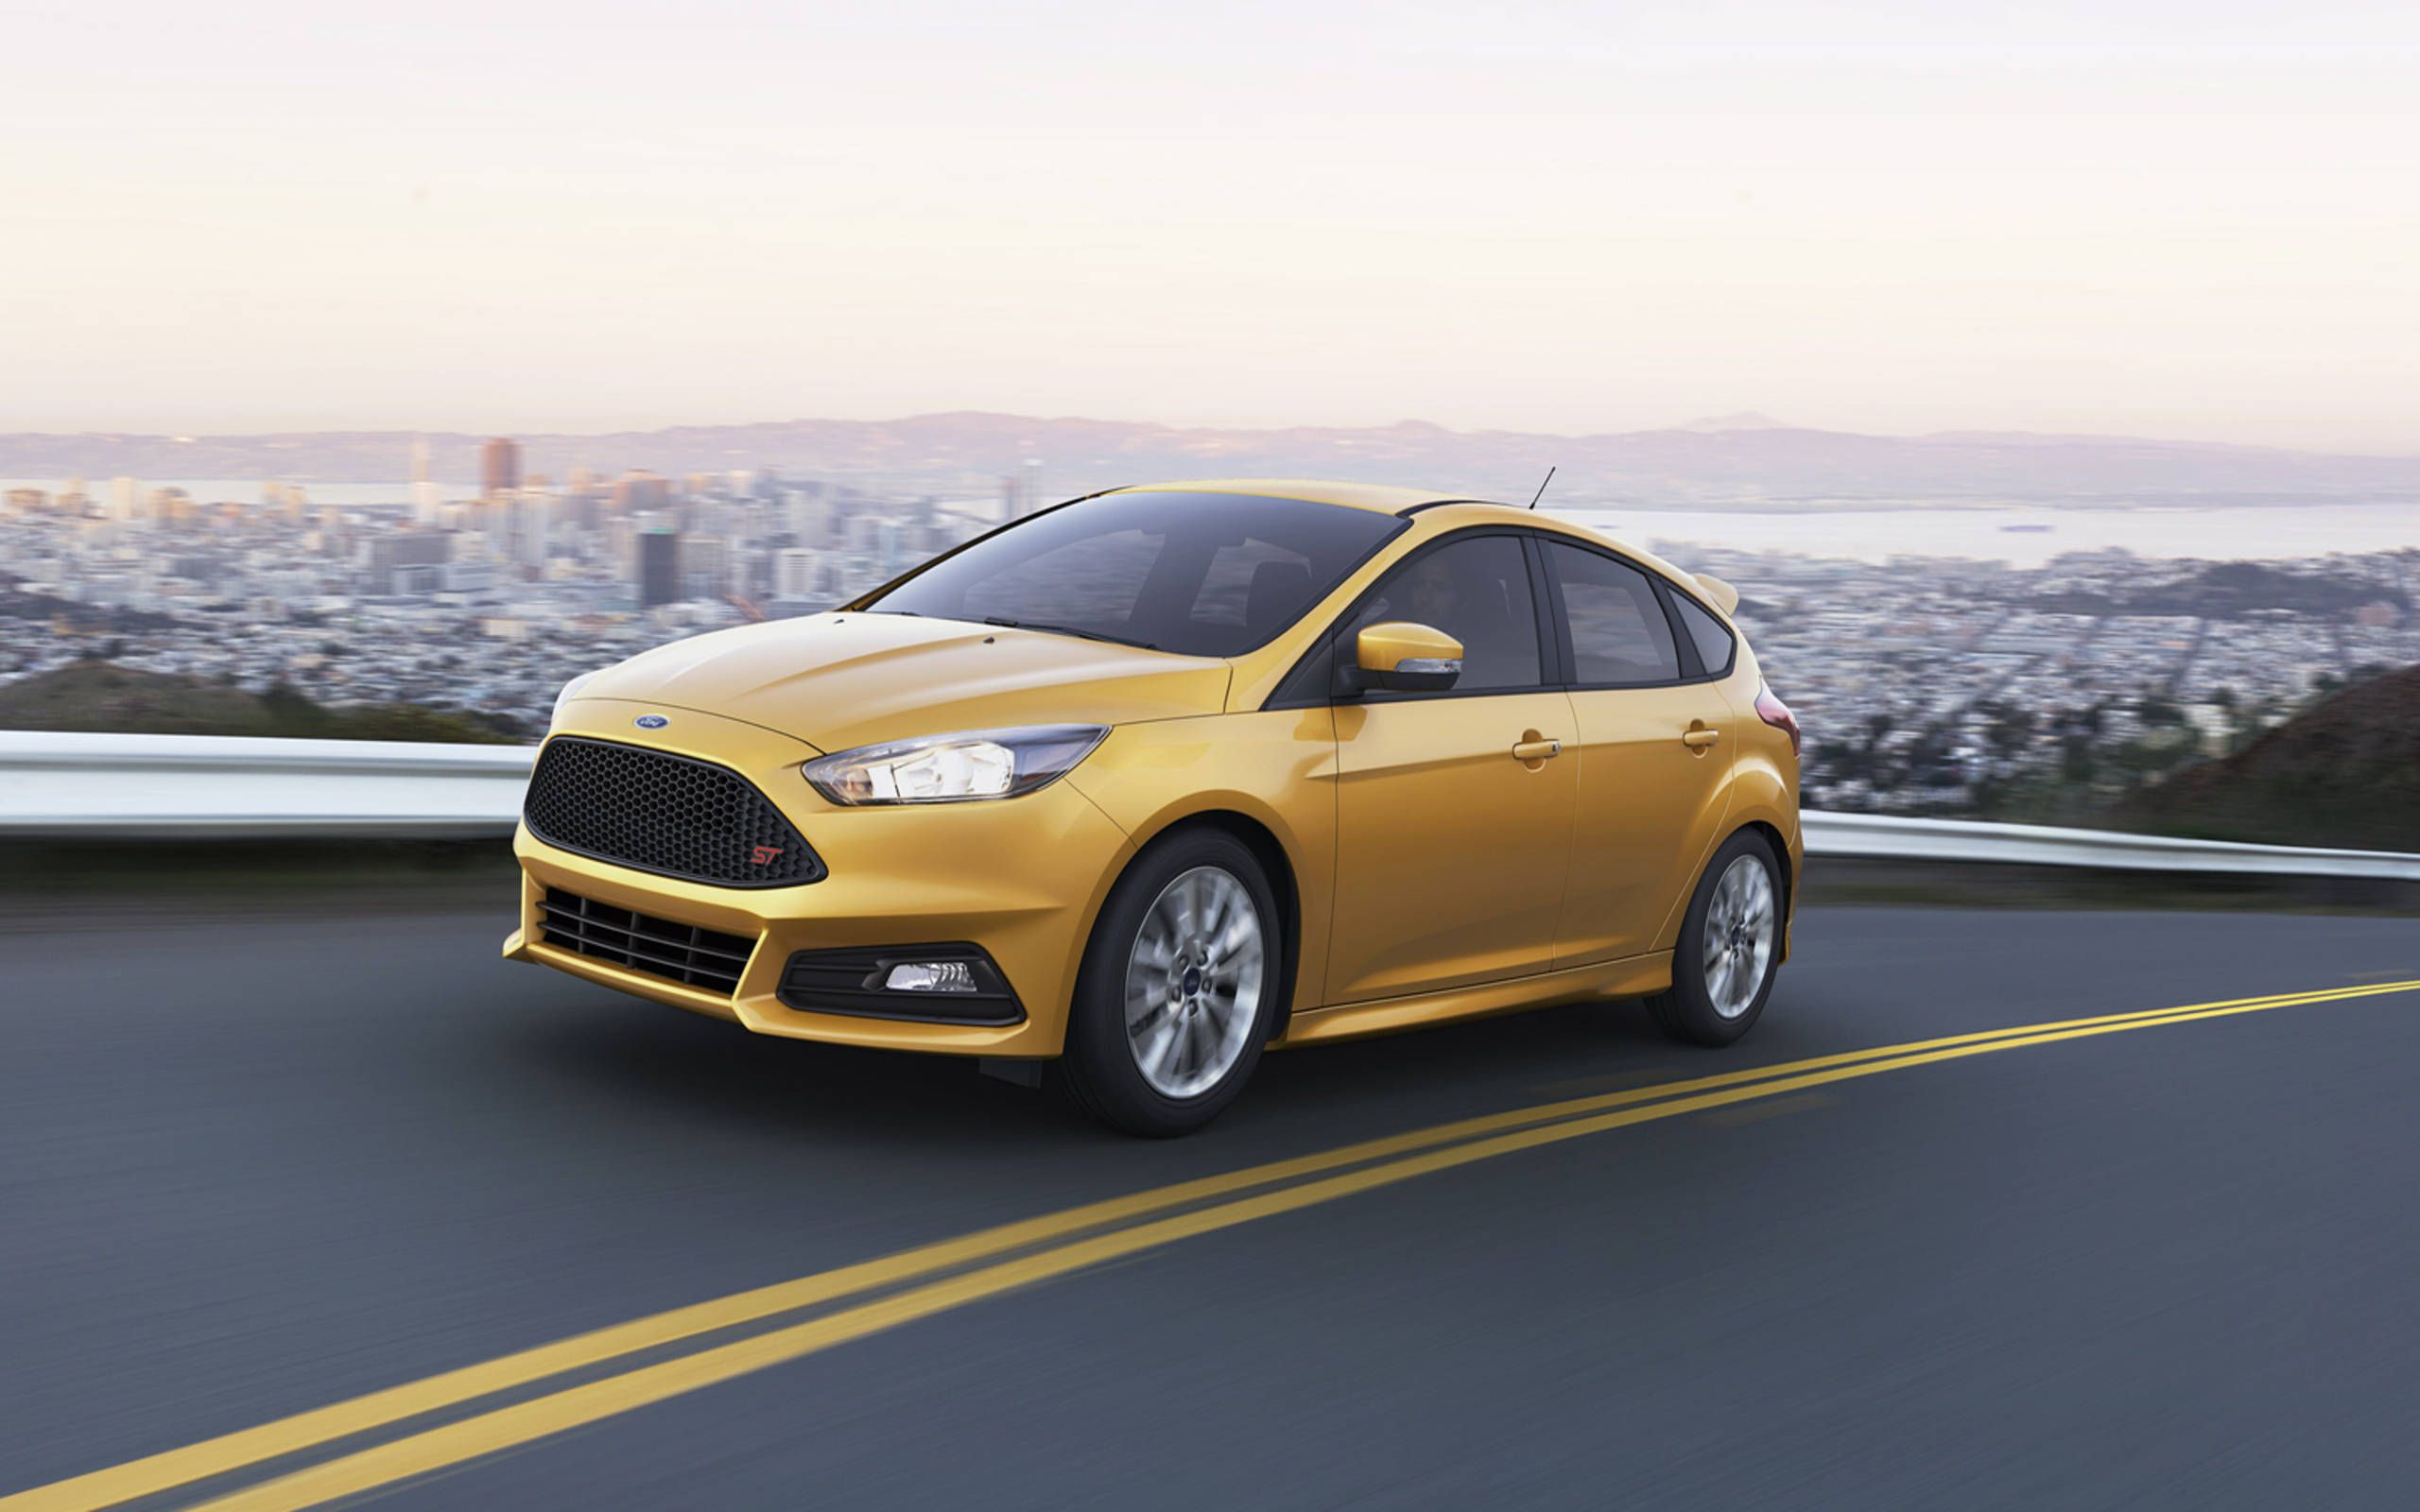 2015 Ford Focus ST review notes: Still the hot-hatch king?